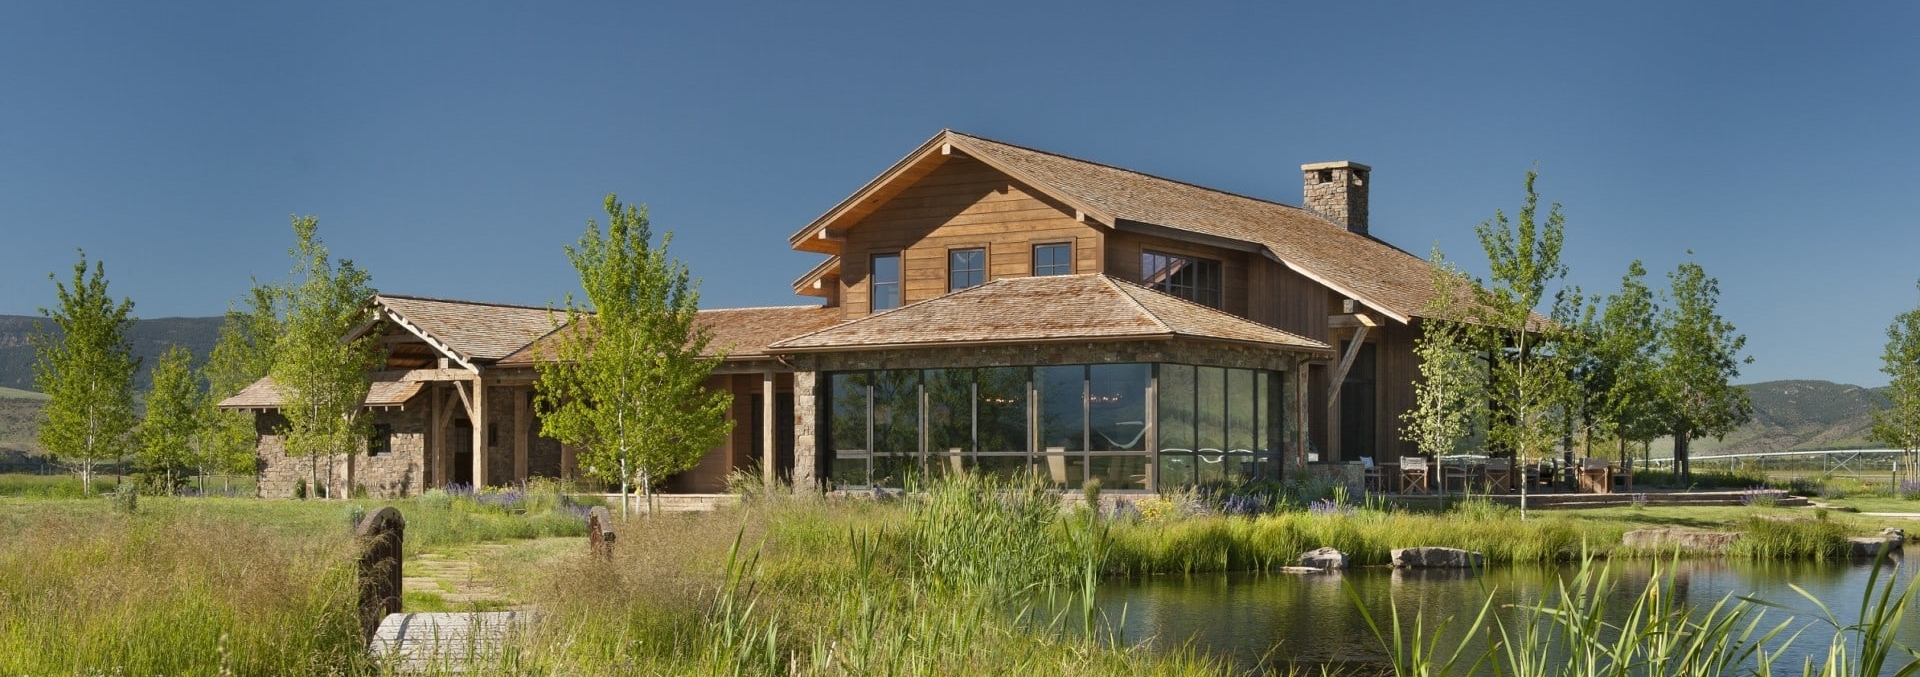 North Fork Builders Montana house by lake